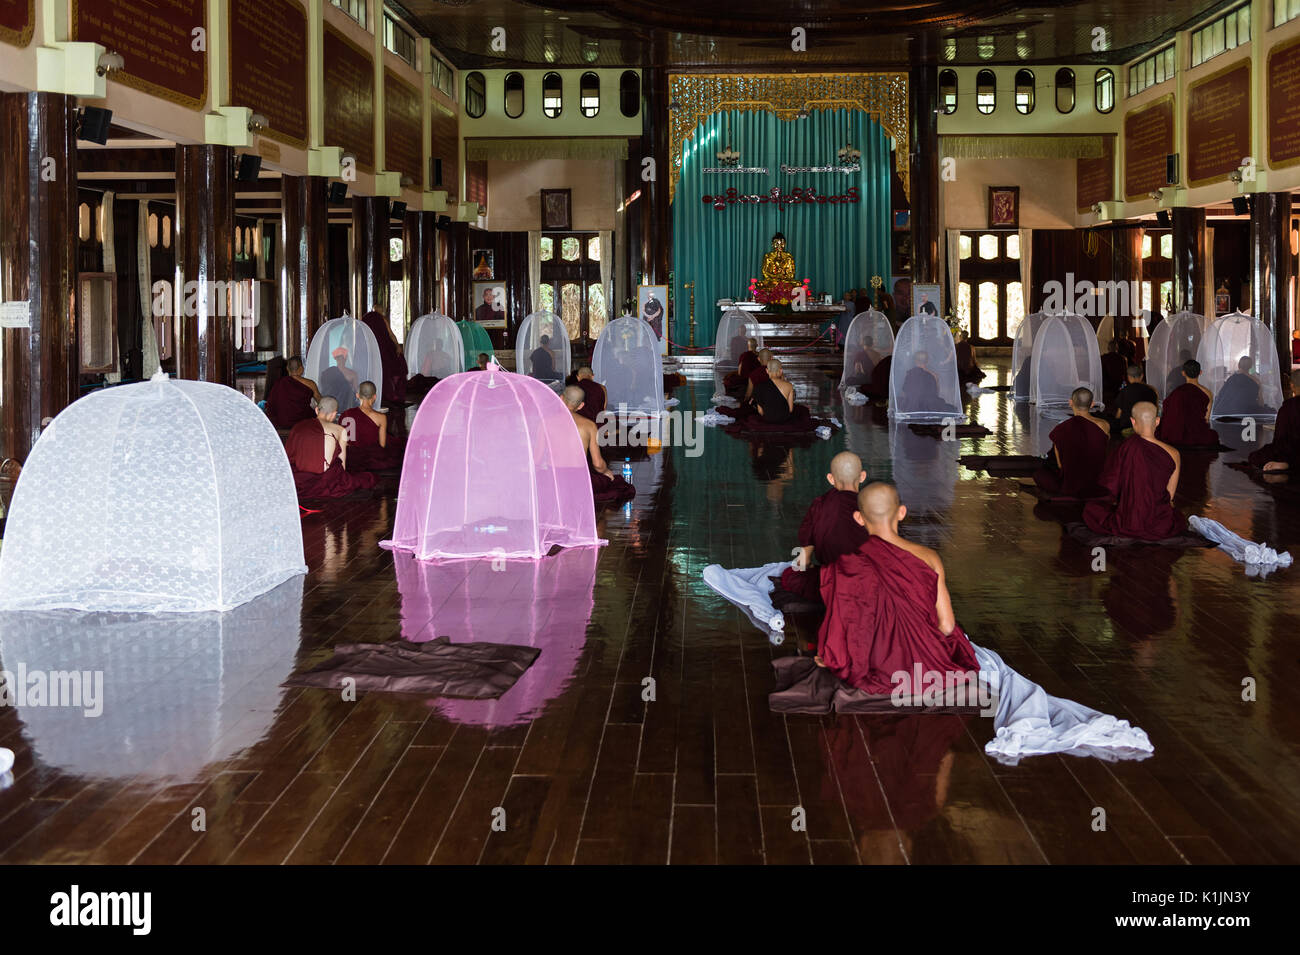 Meditation hall in Pa-Auk-Tawya Monastery near Mawlamyine, one of the largest centres in Myanmar, which allows foreignes to participate in insight awa Stock Photo